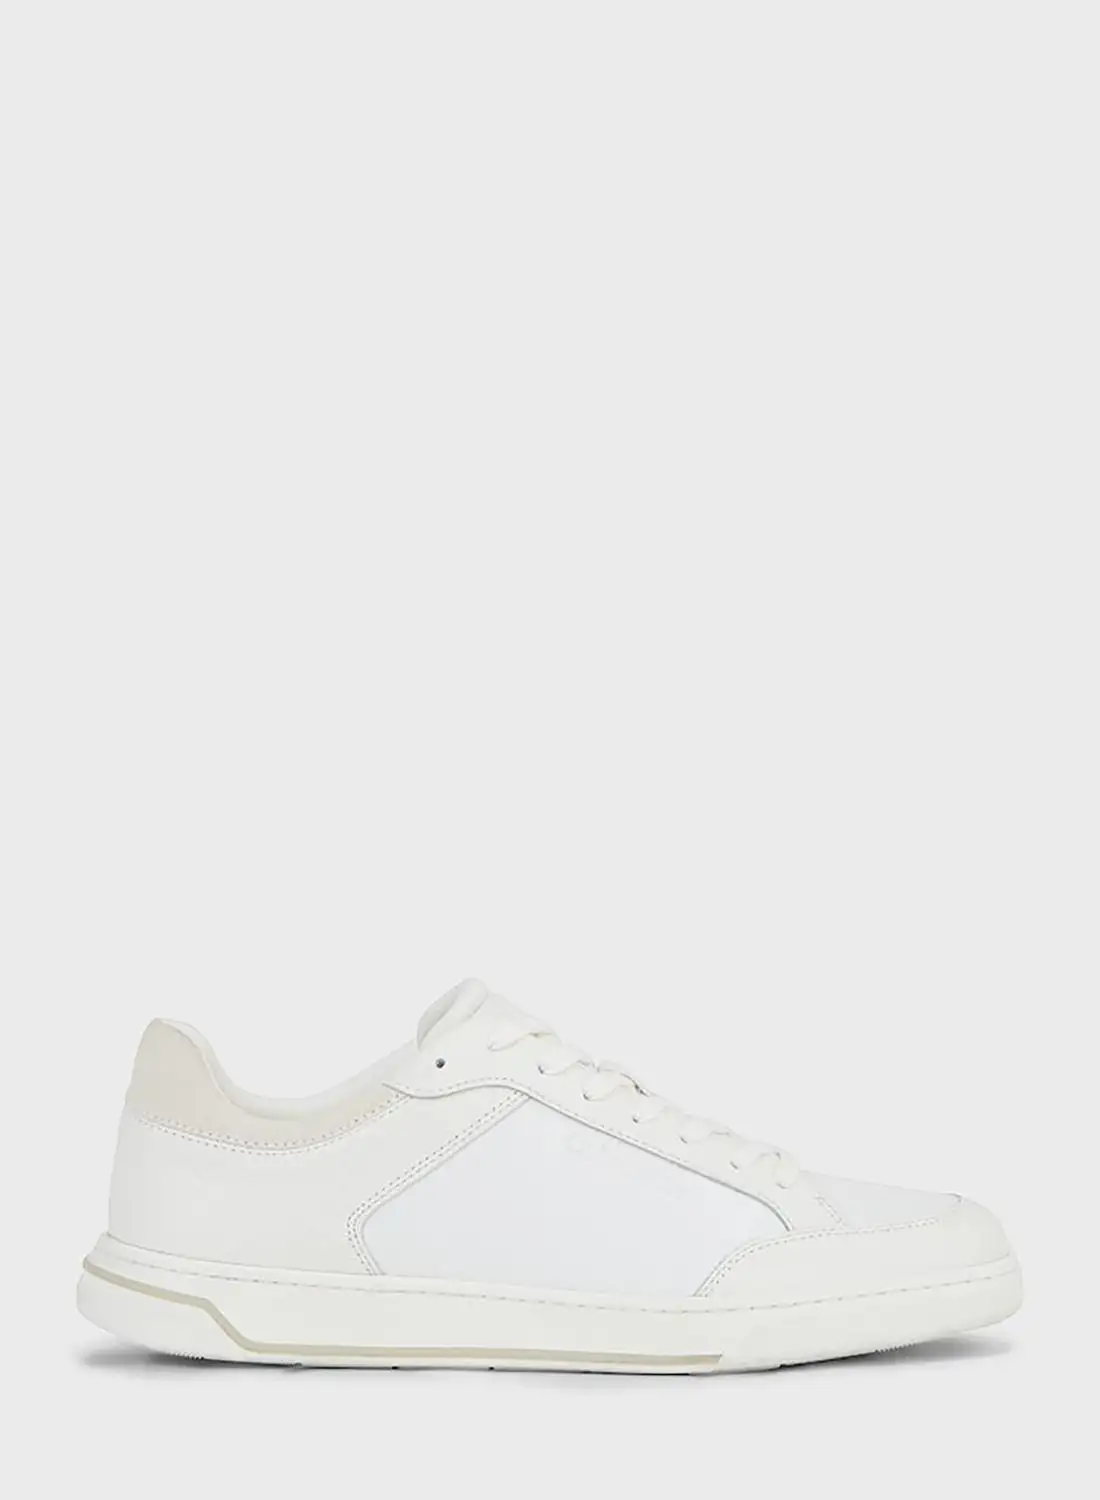 CALVIN KLEIN Low Top Lace Up Sneakers